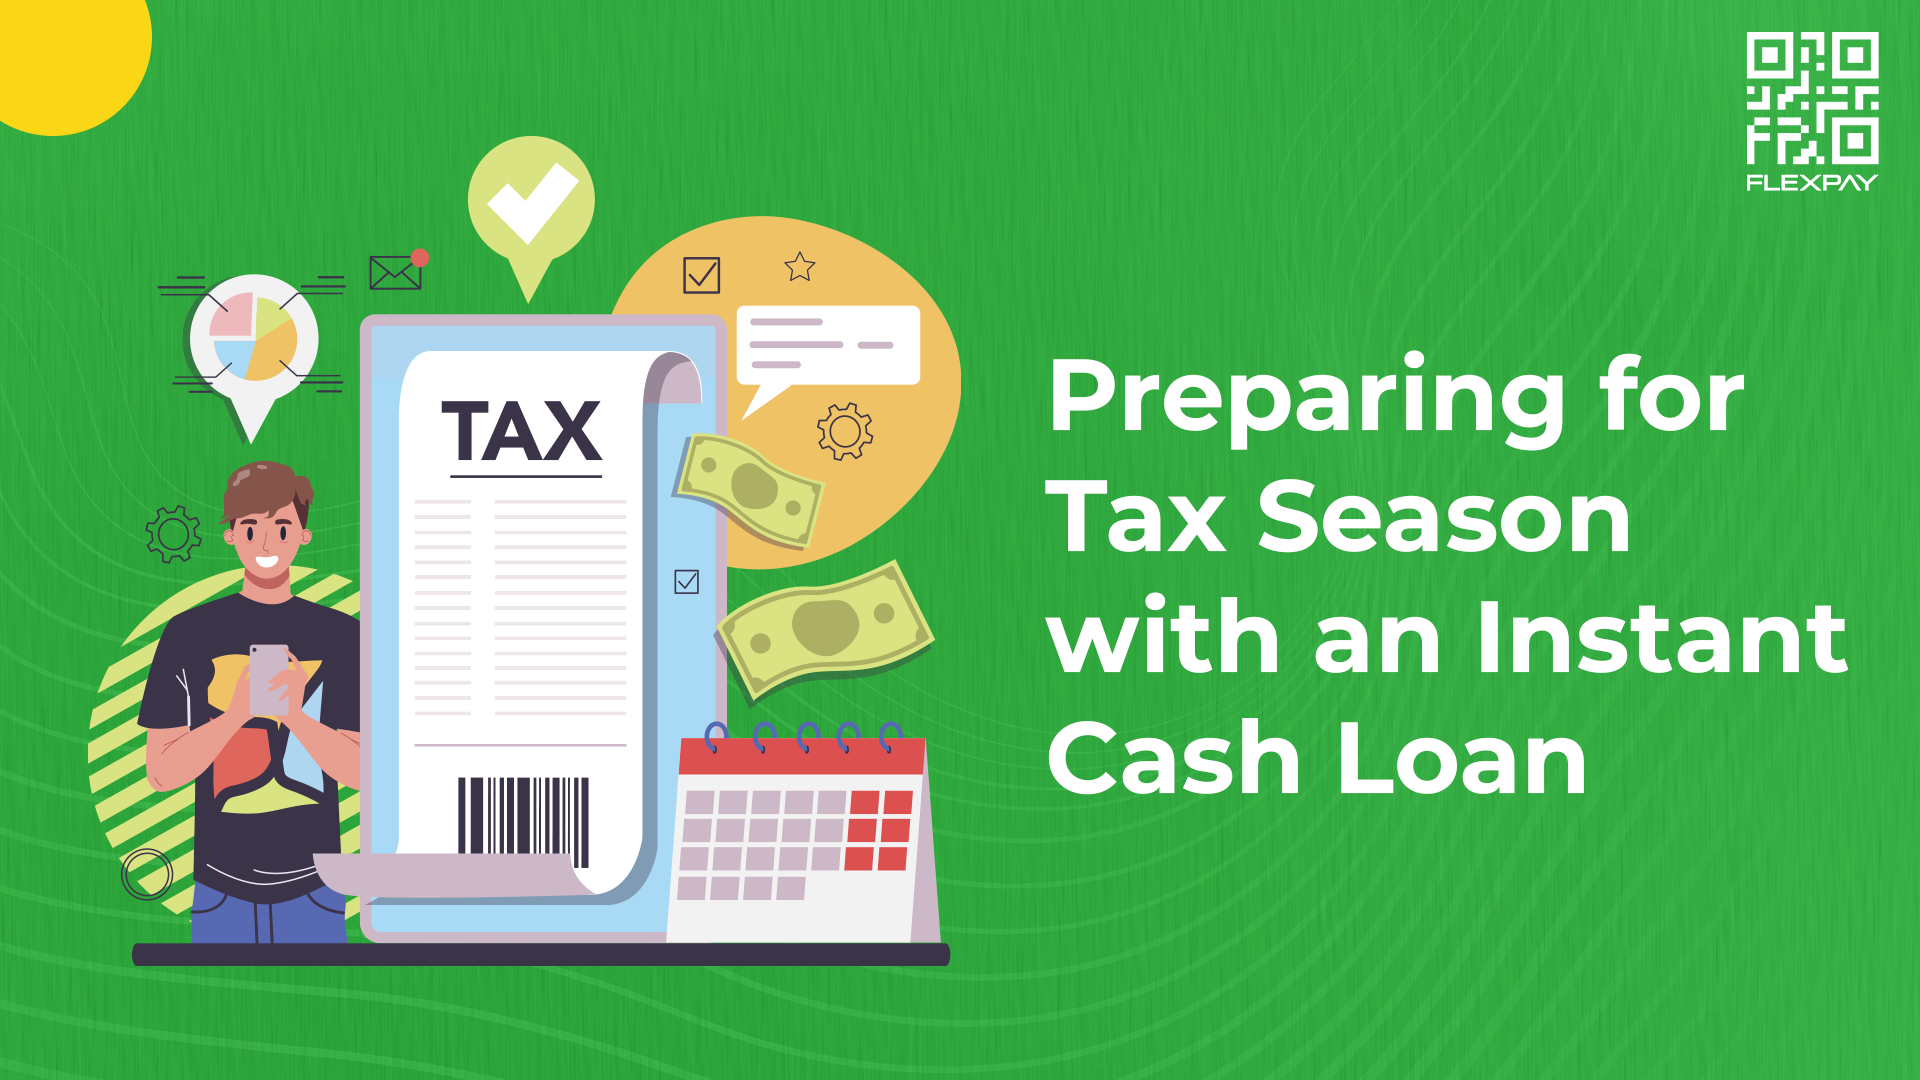 Preparing for Tax Season with an Instant Cash Loan